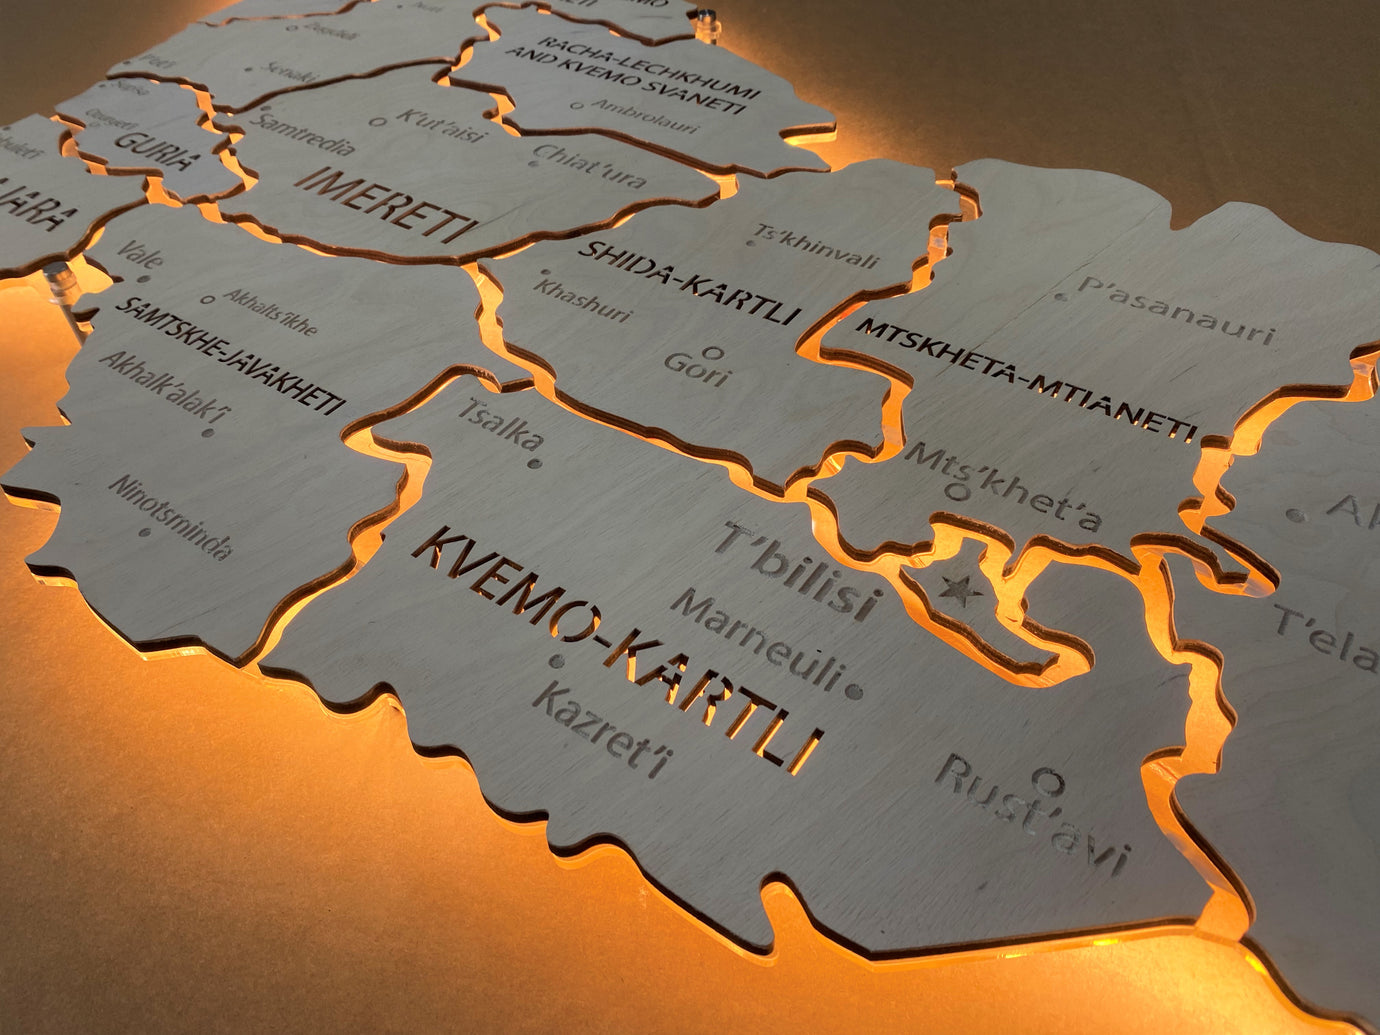 Georgia LED map on acrylic glass with backlighting between regions color White